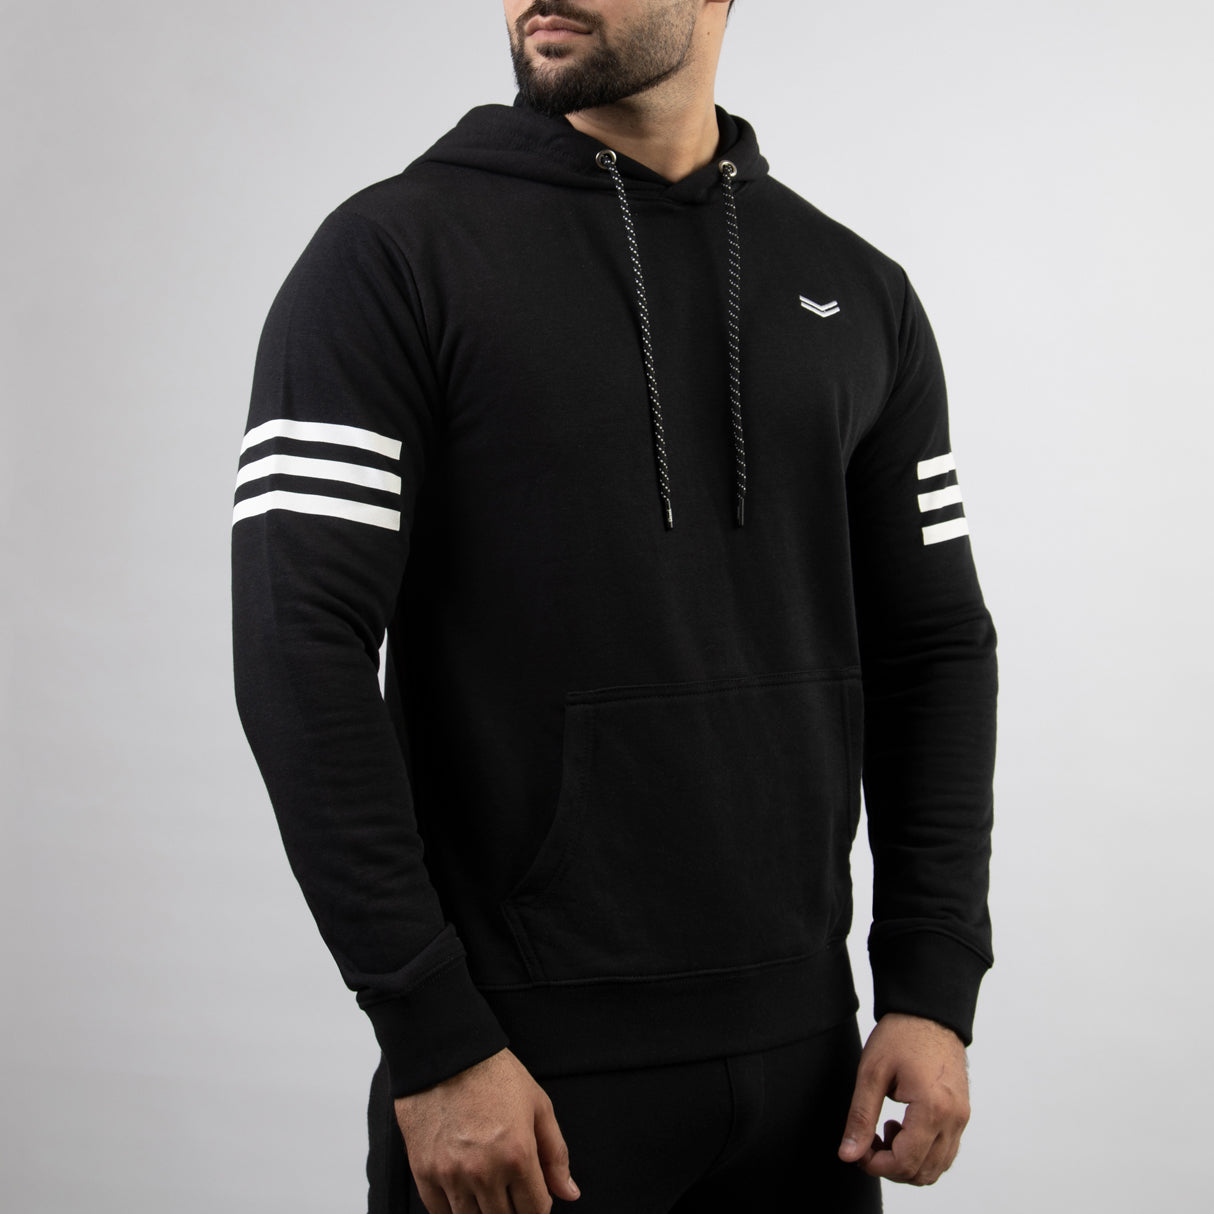 Black Hoodie with White Side Stripes